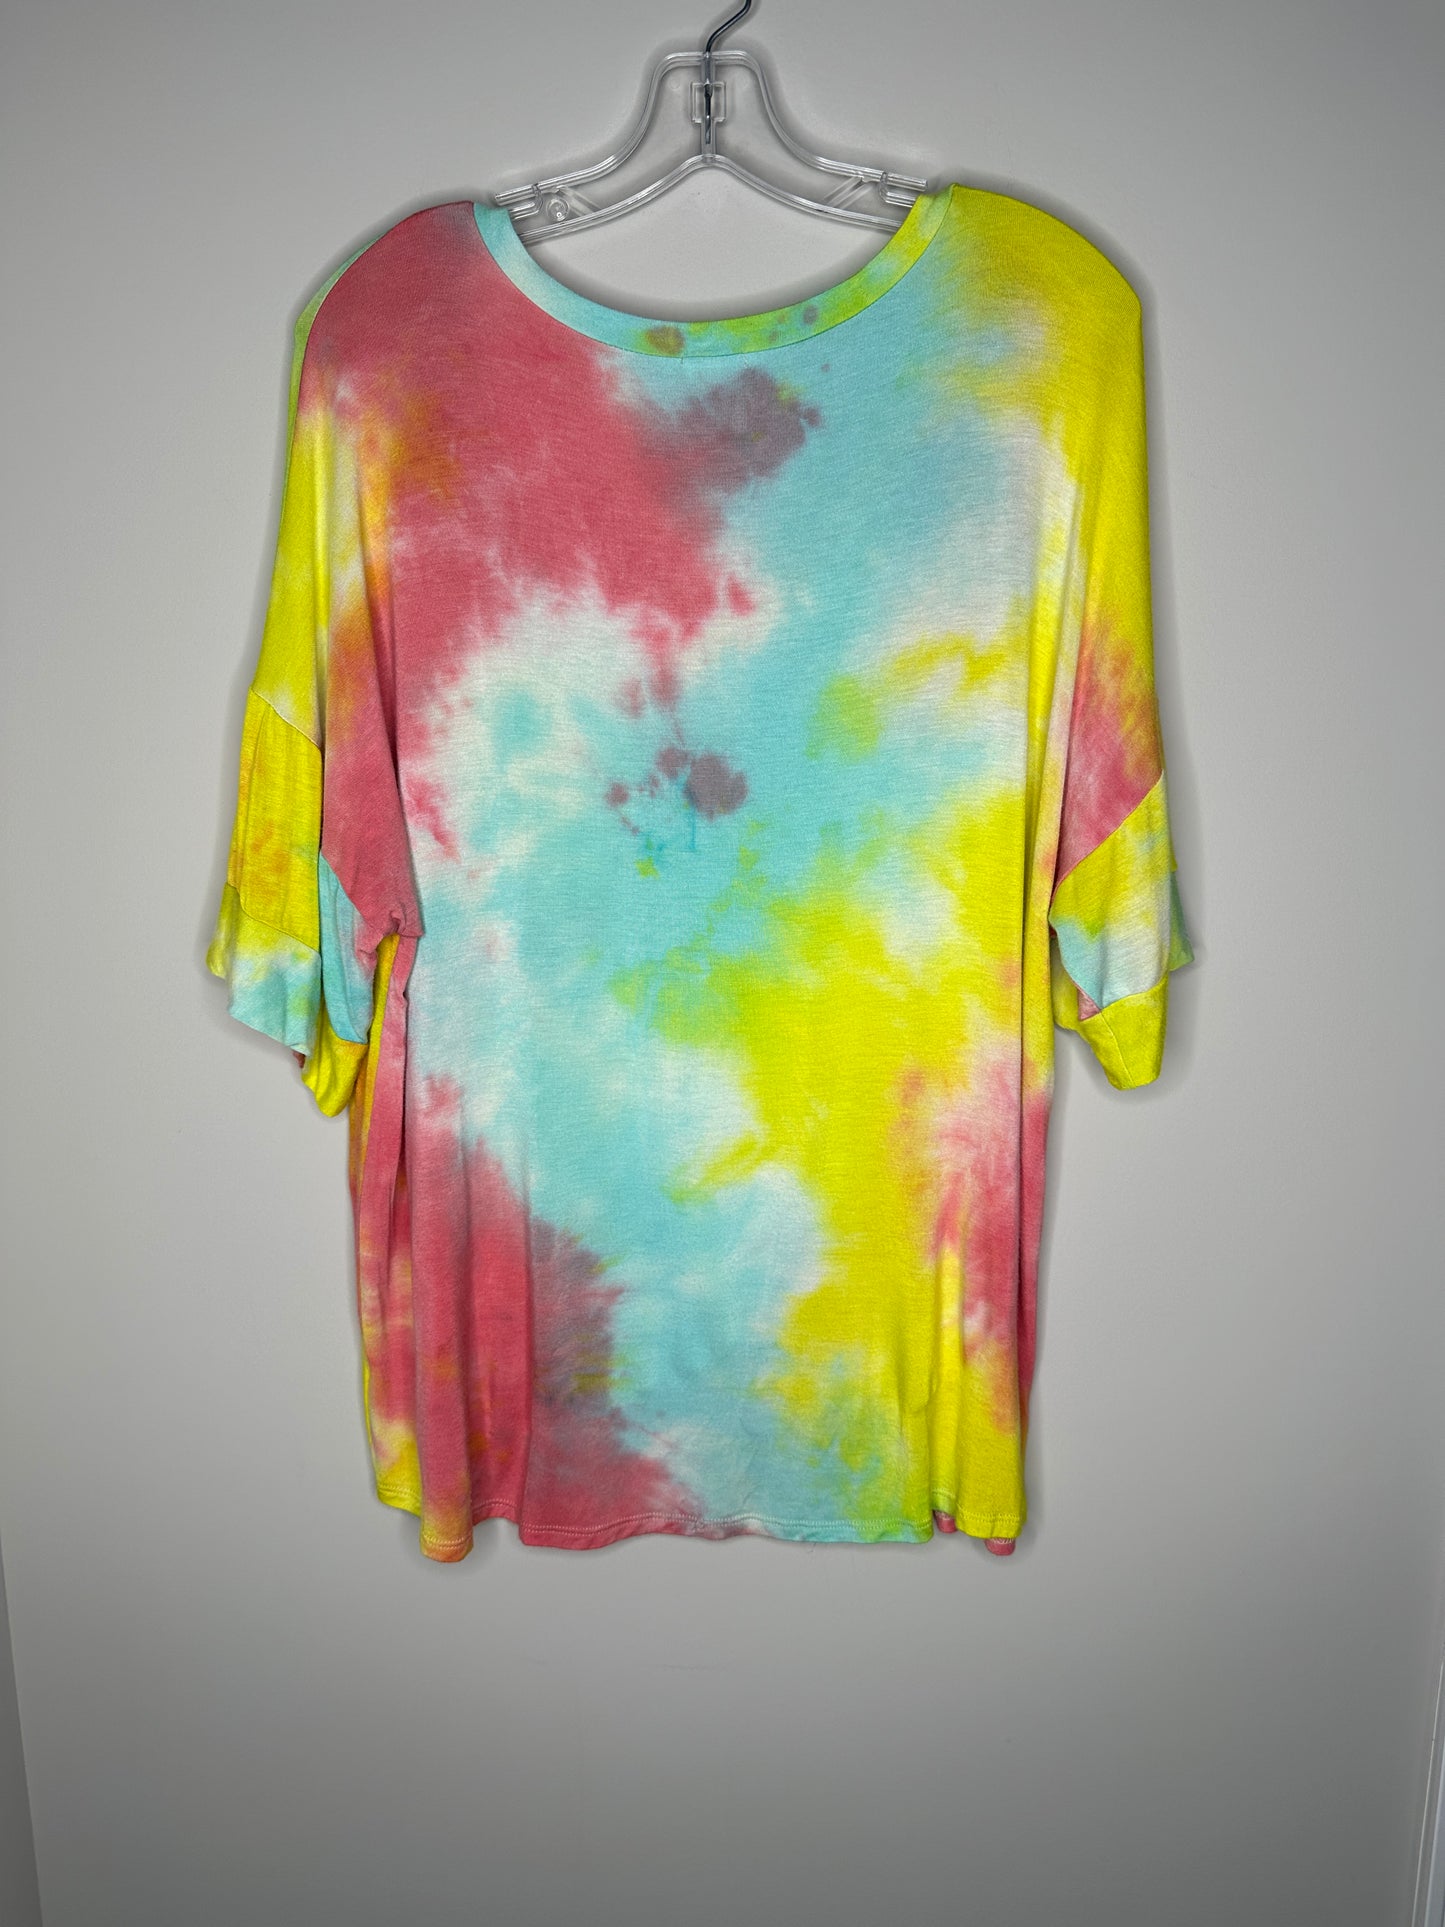 Lovely Melody Size XL (not marked) Multicolor Tie Dye V-Neck Tee T-Shirt